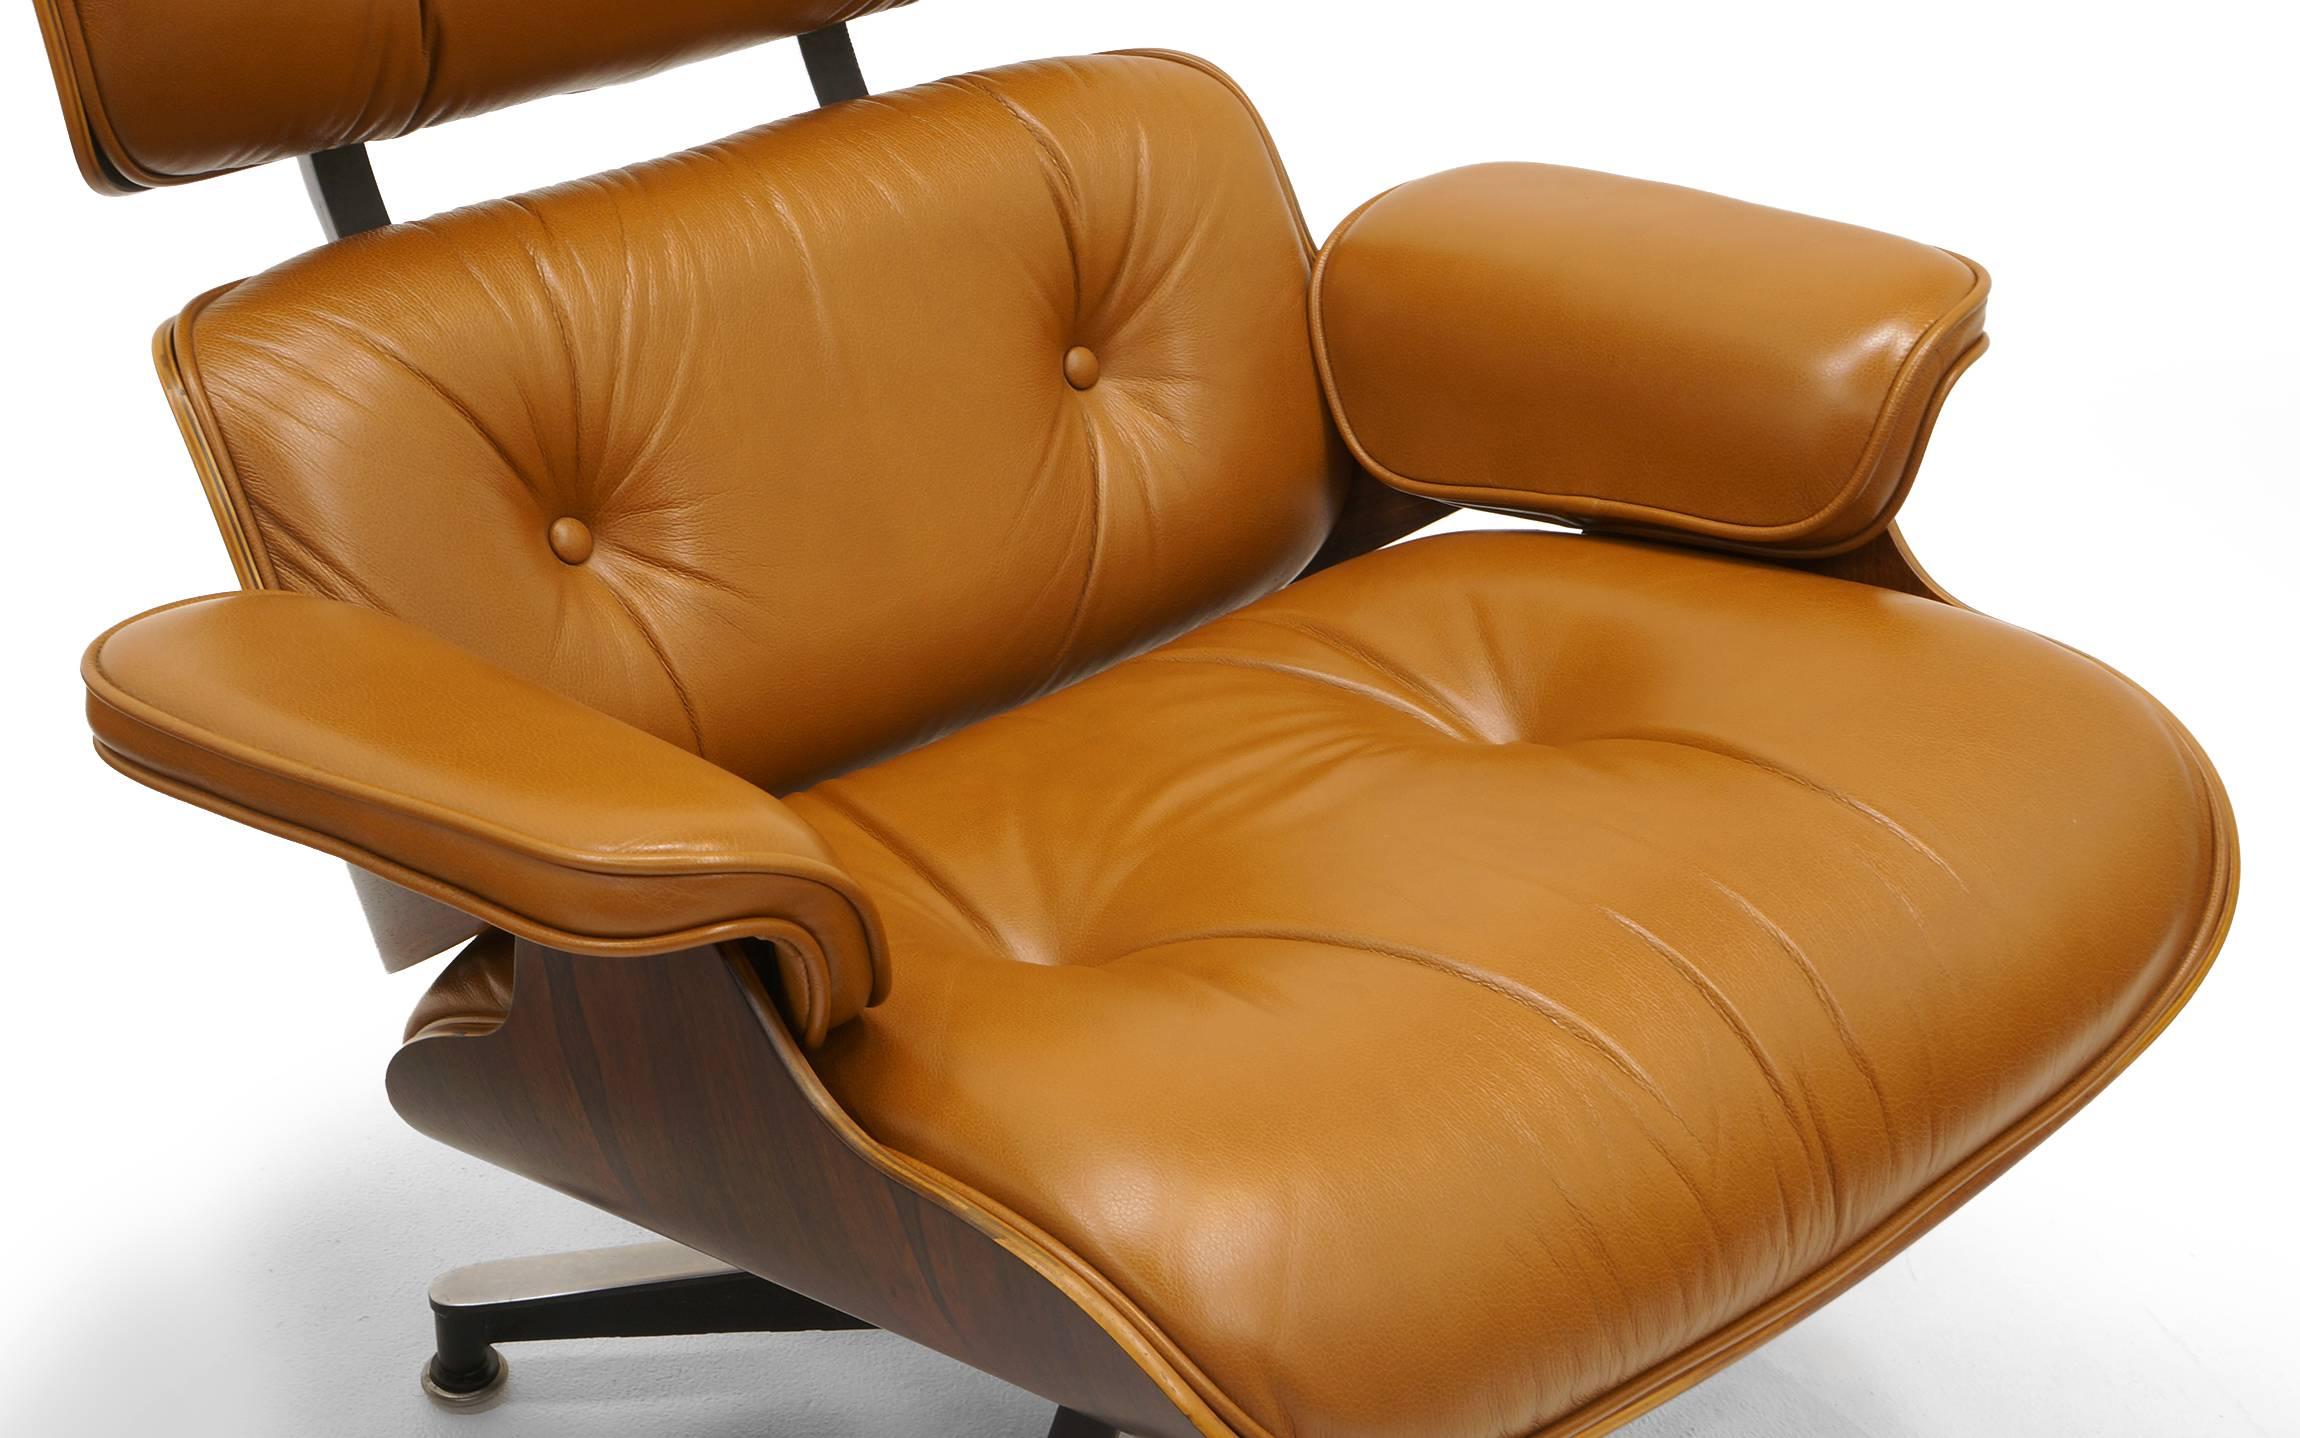 American Eames Lounge Chair and Ottoman, Rosewood and Rare Cognac Leather